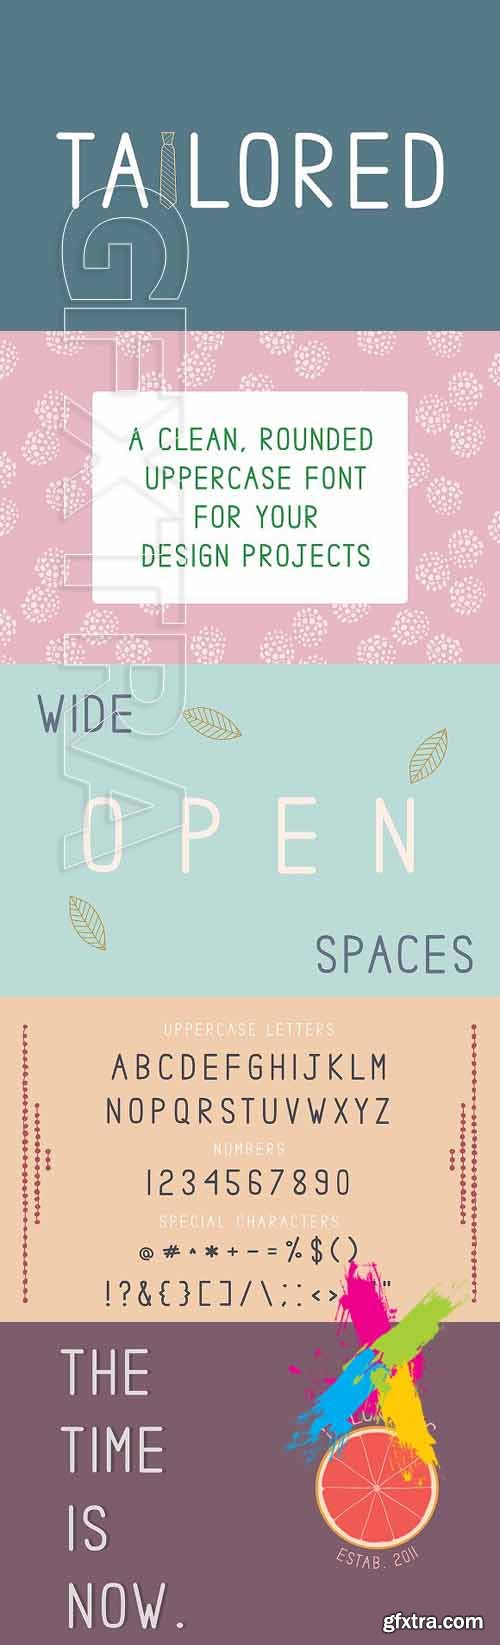 CM - Tailored - Clean Uppercase Font 1511089